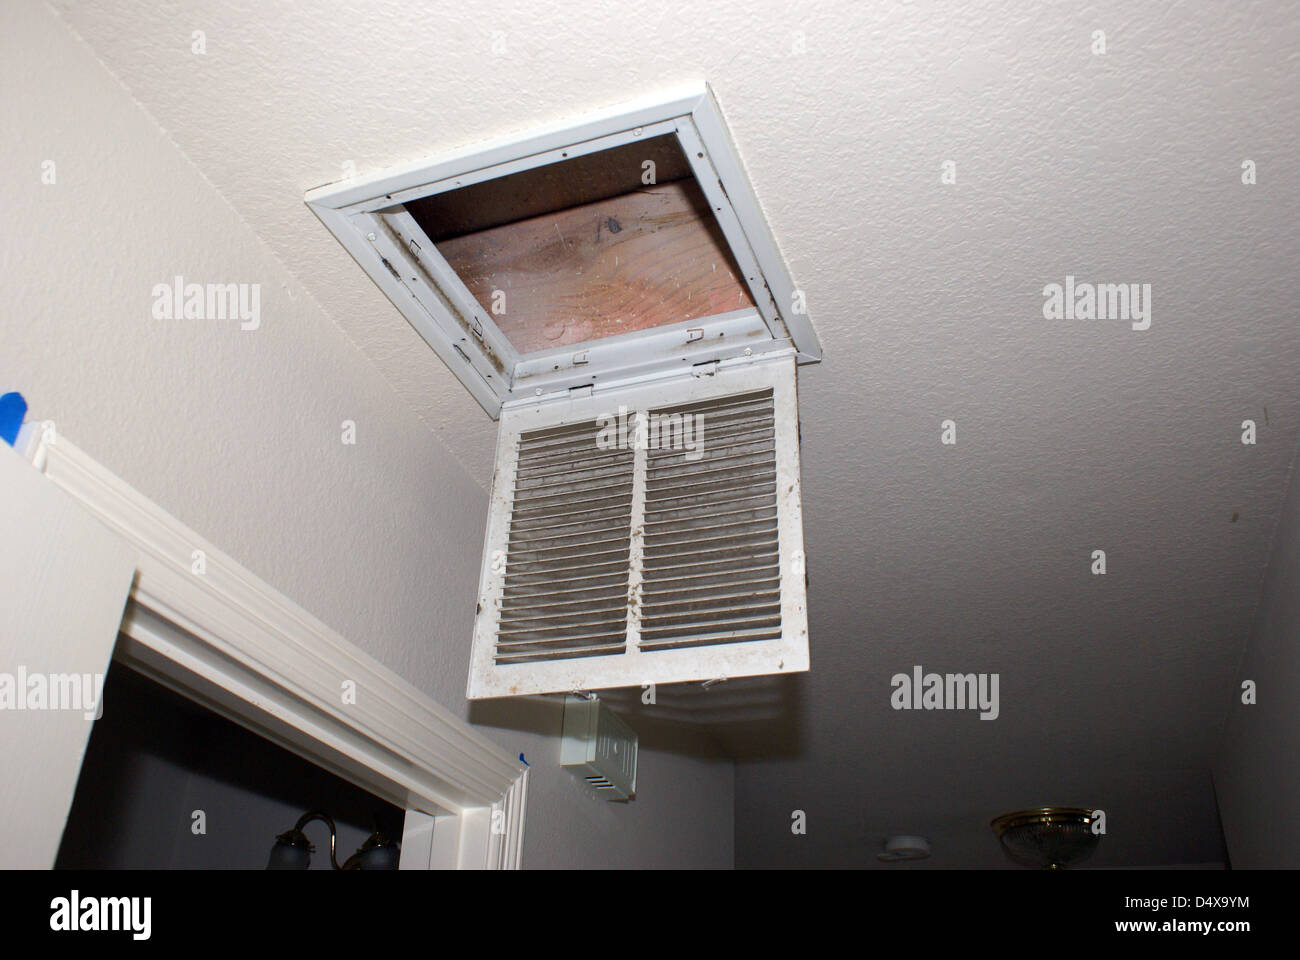 Ceiling Air Vent Stock Photos Ceiling Air Vent Stock Images Alamy